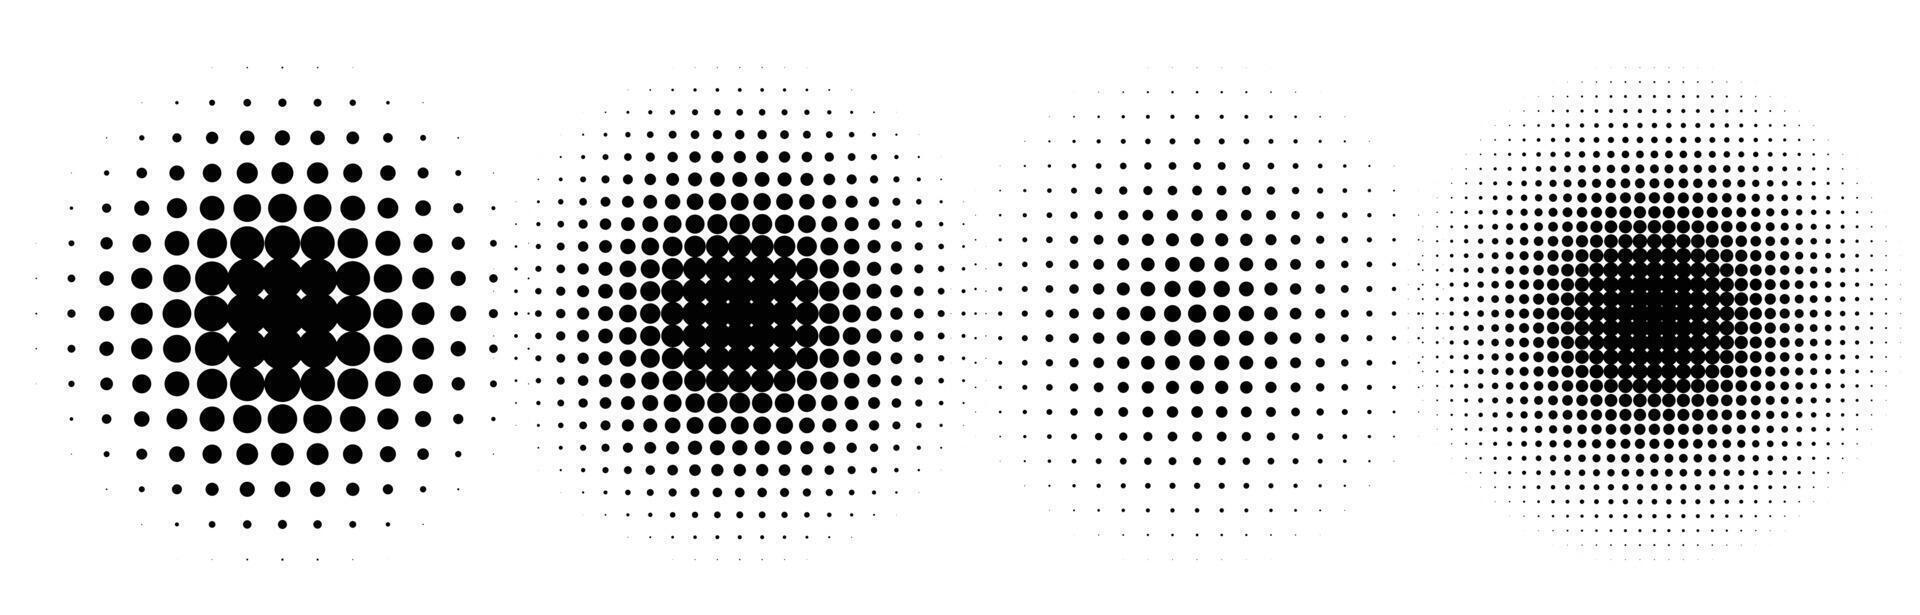 Abstract grunge halftone grid dots circles background design vector